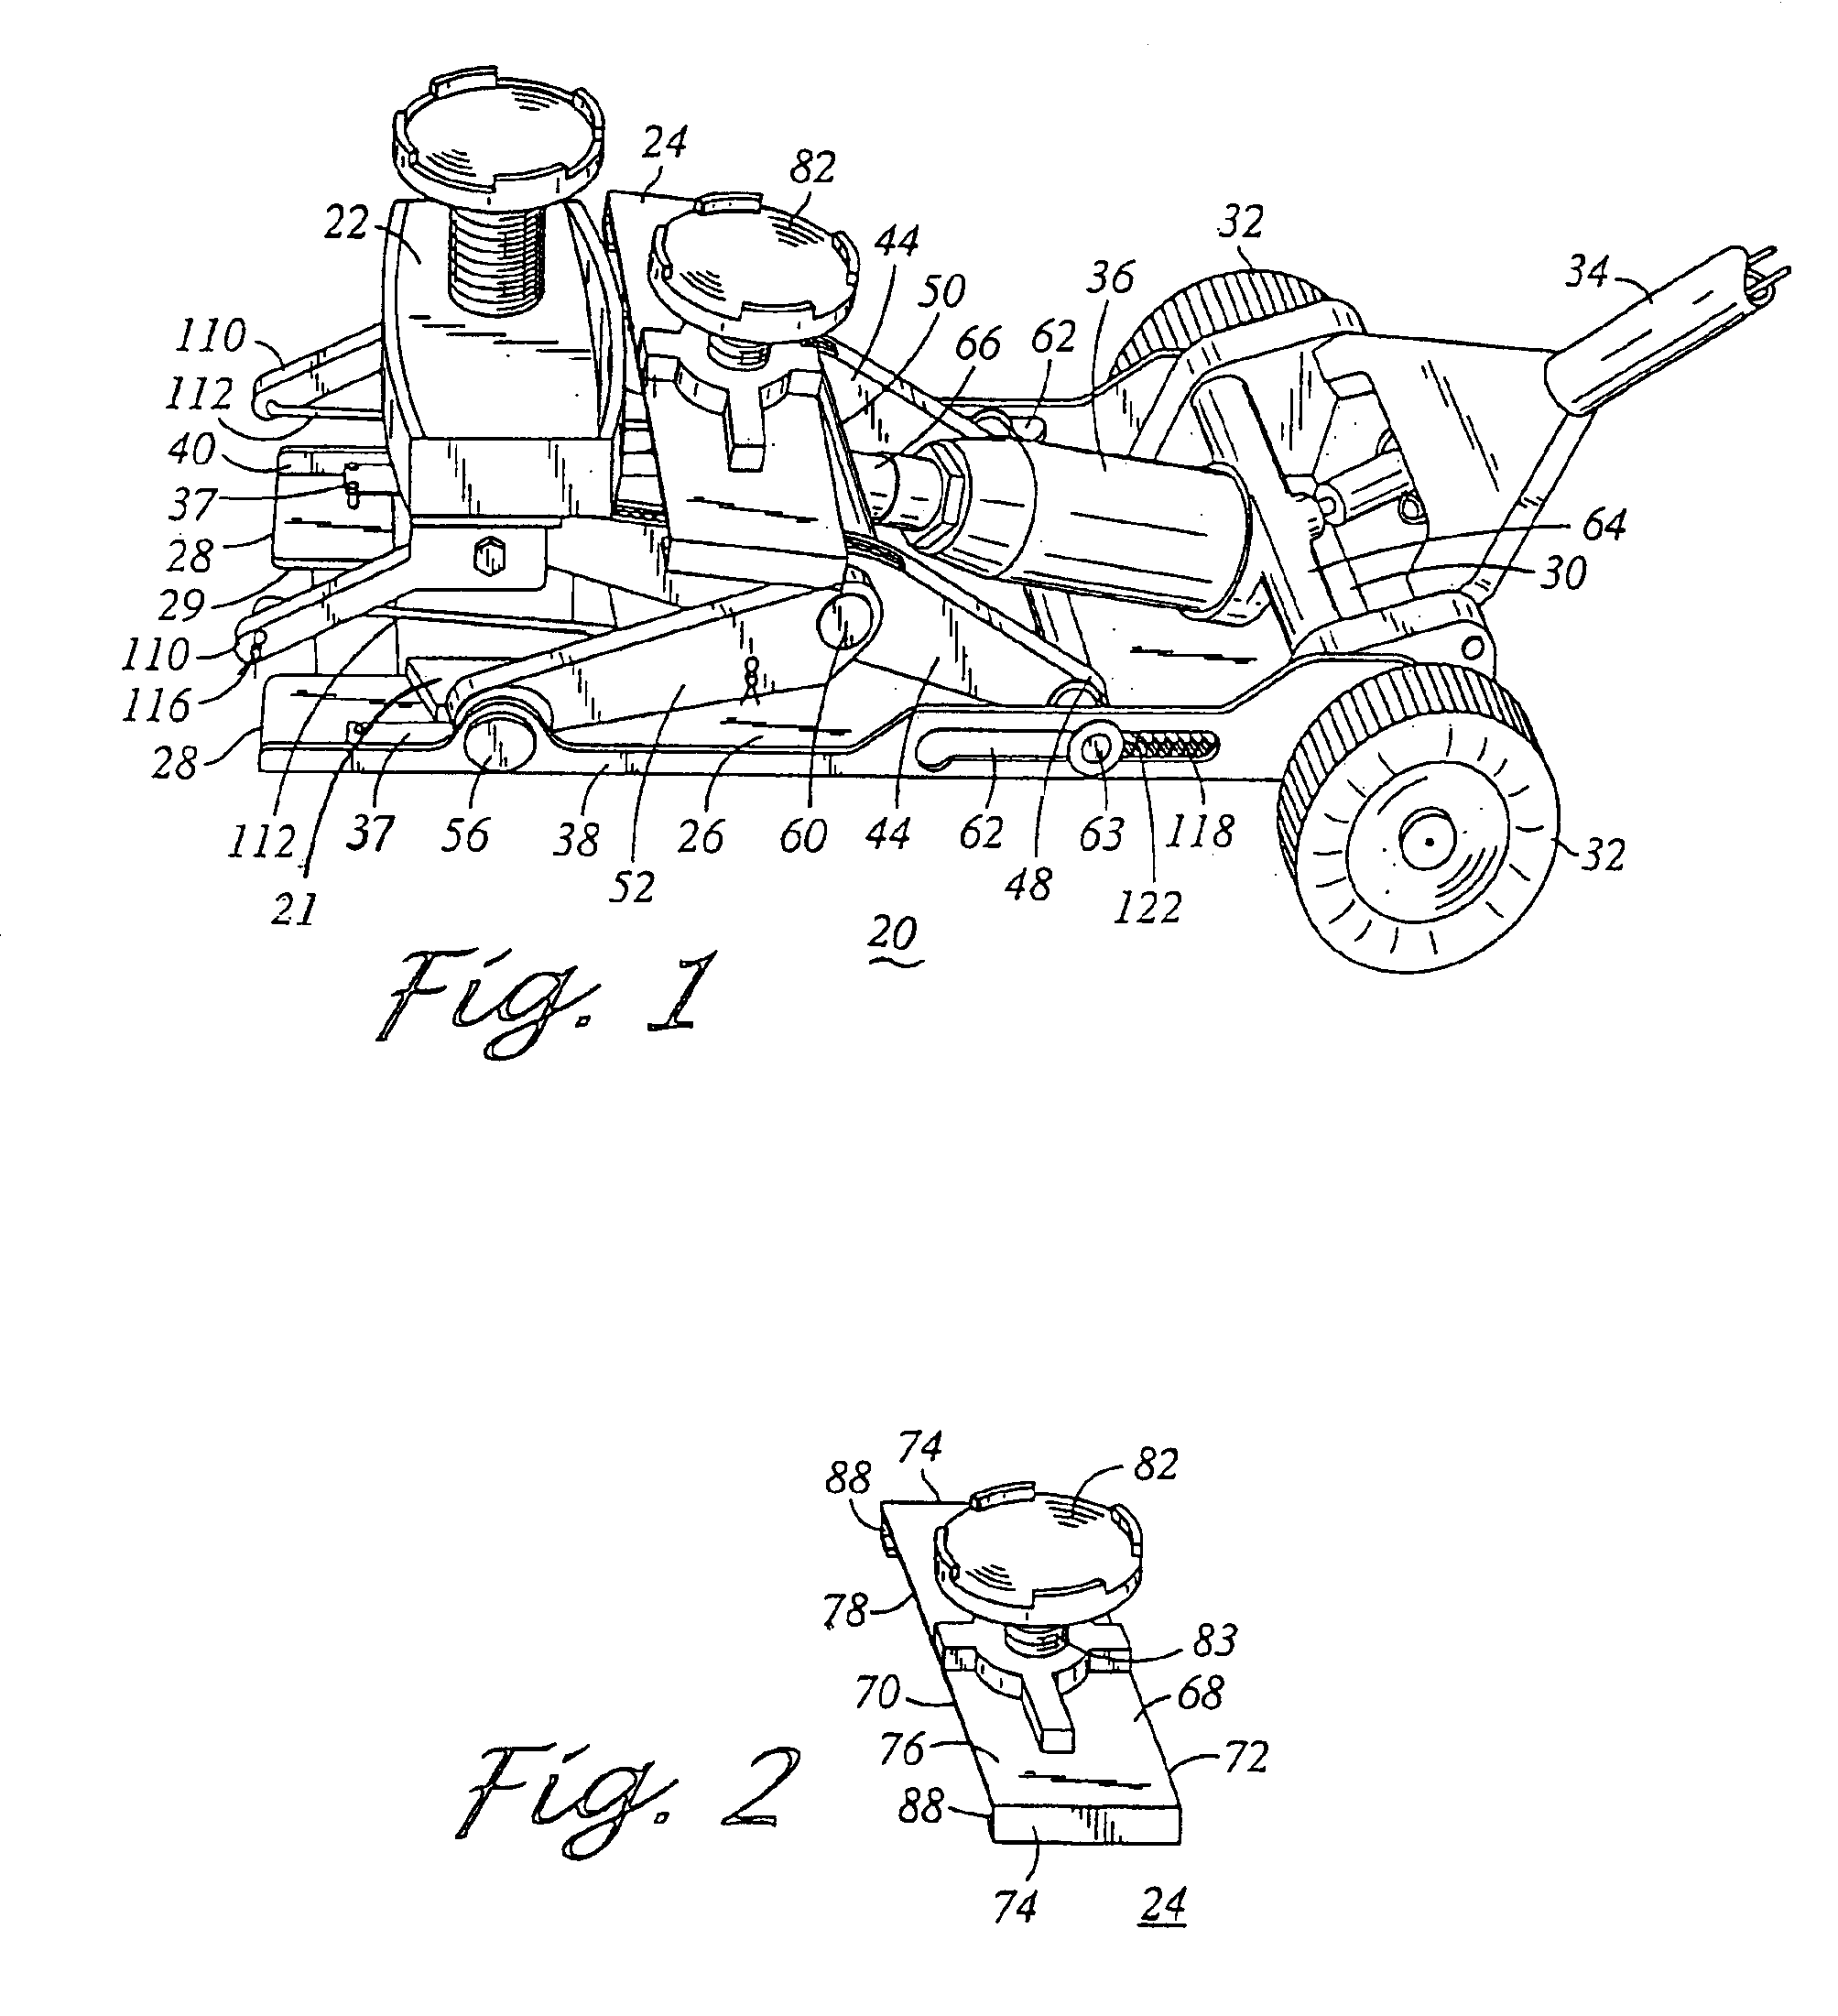 Power unit for use with a jack stand that is convertible into a load-lifting jack